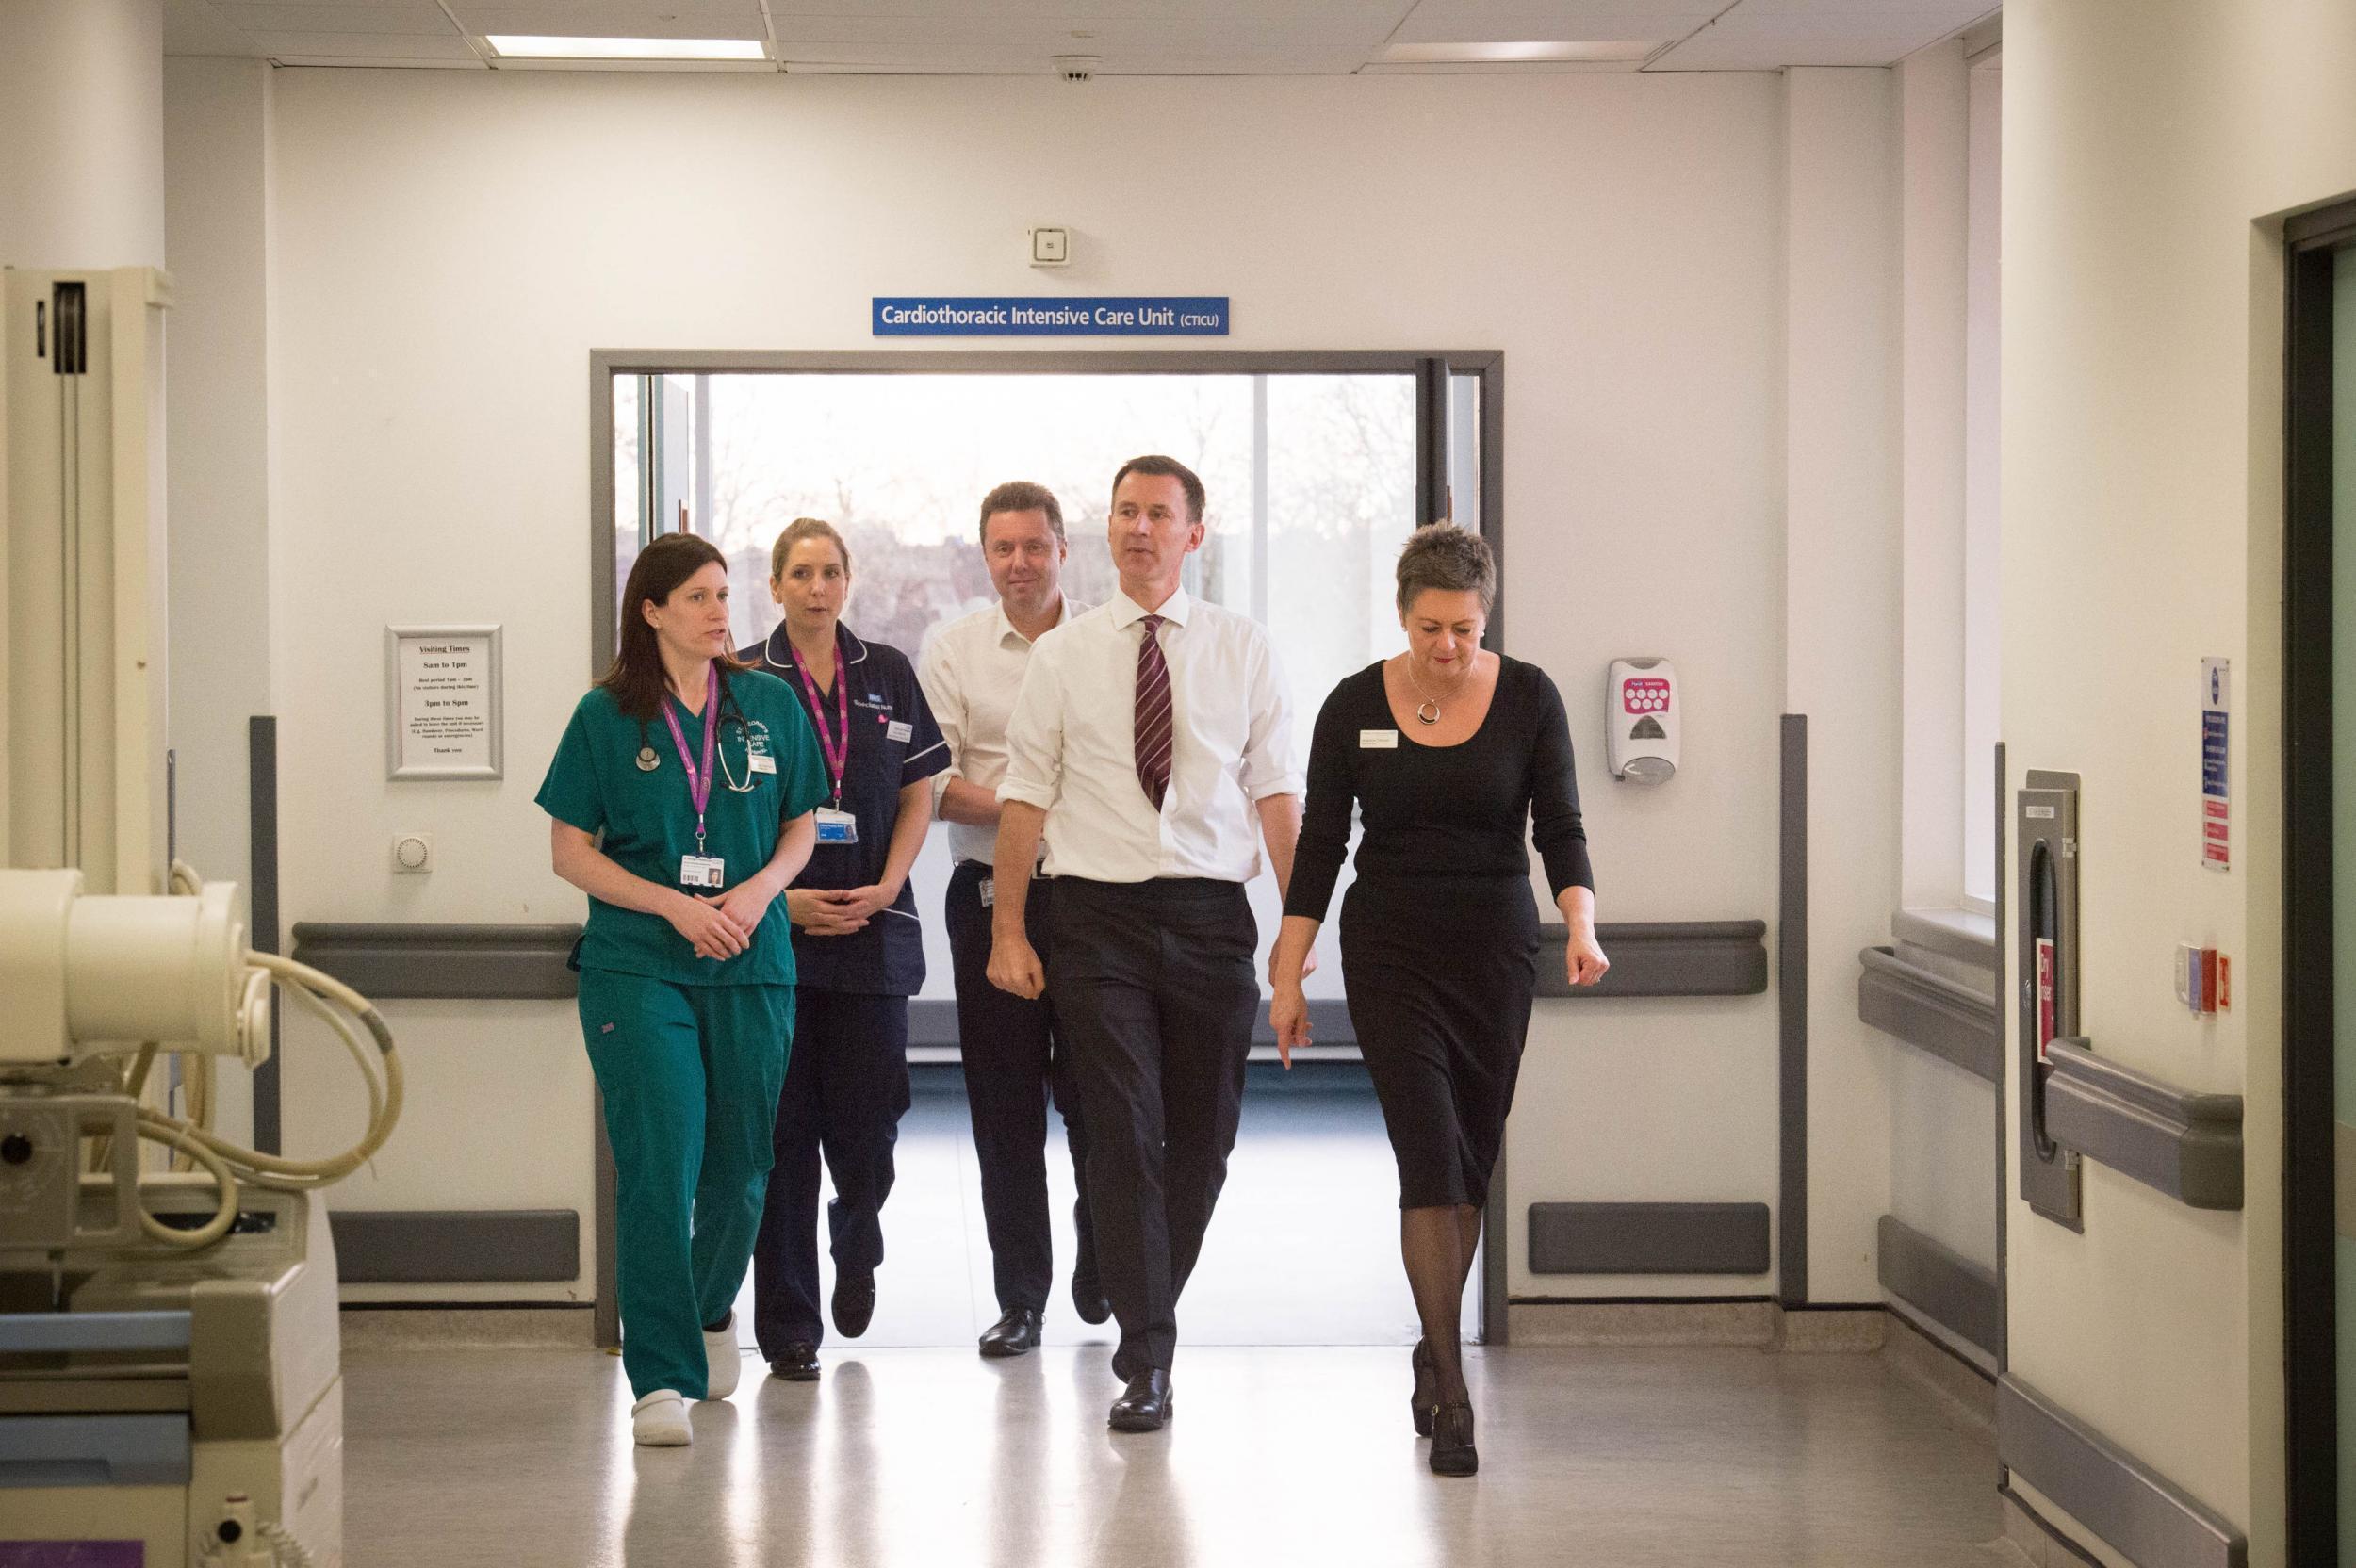 Jeremy Hunt seems to think the NHS is doing just fine, but doctors have a different view on the situation